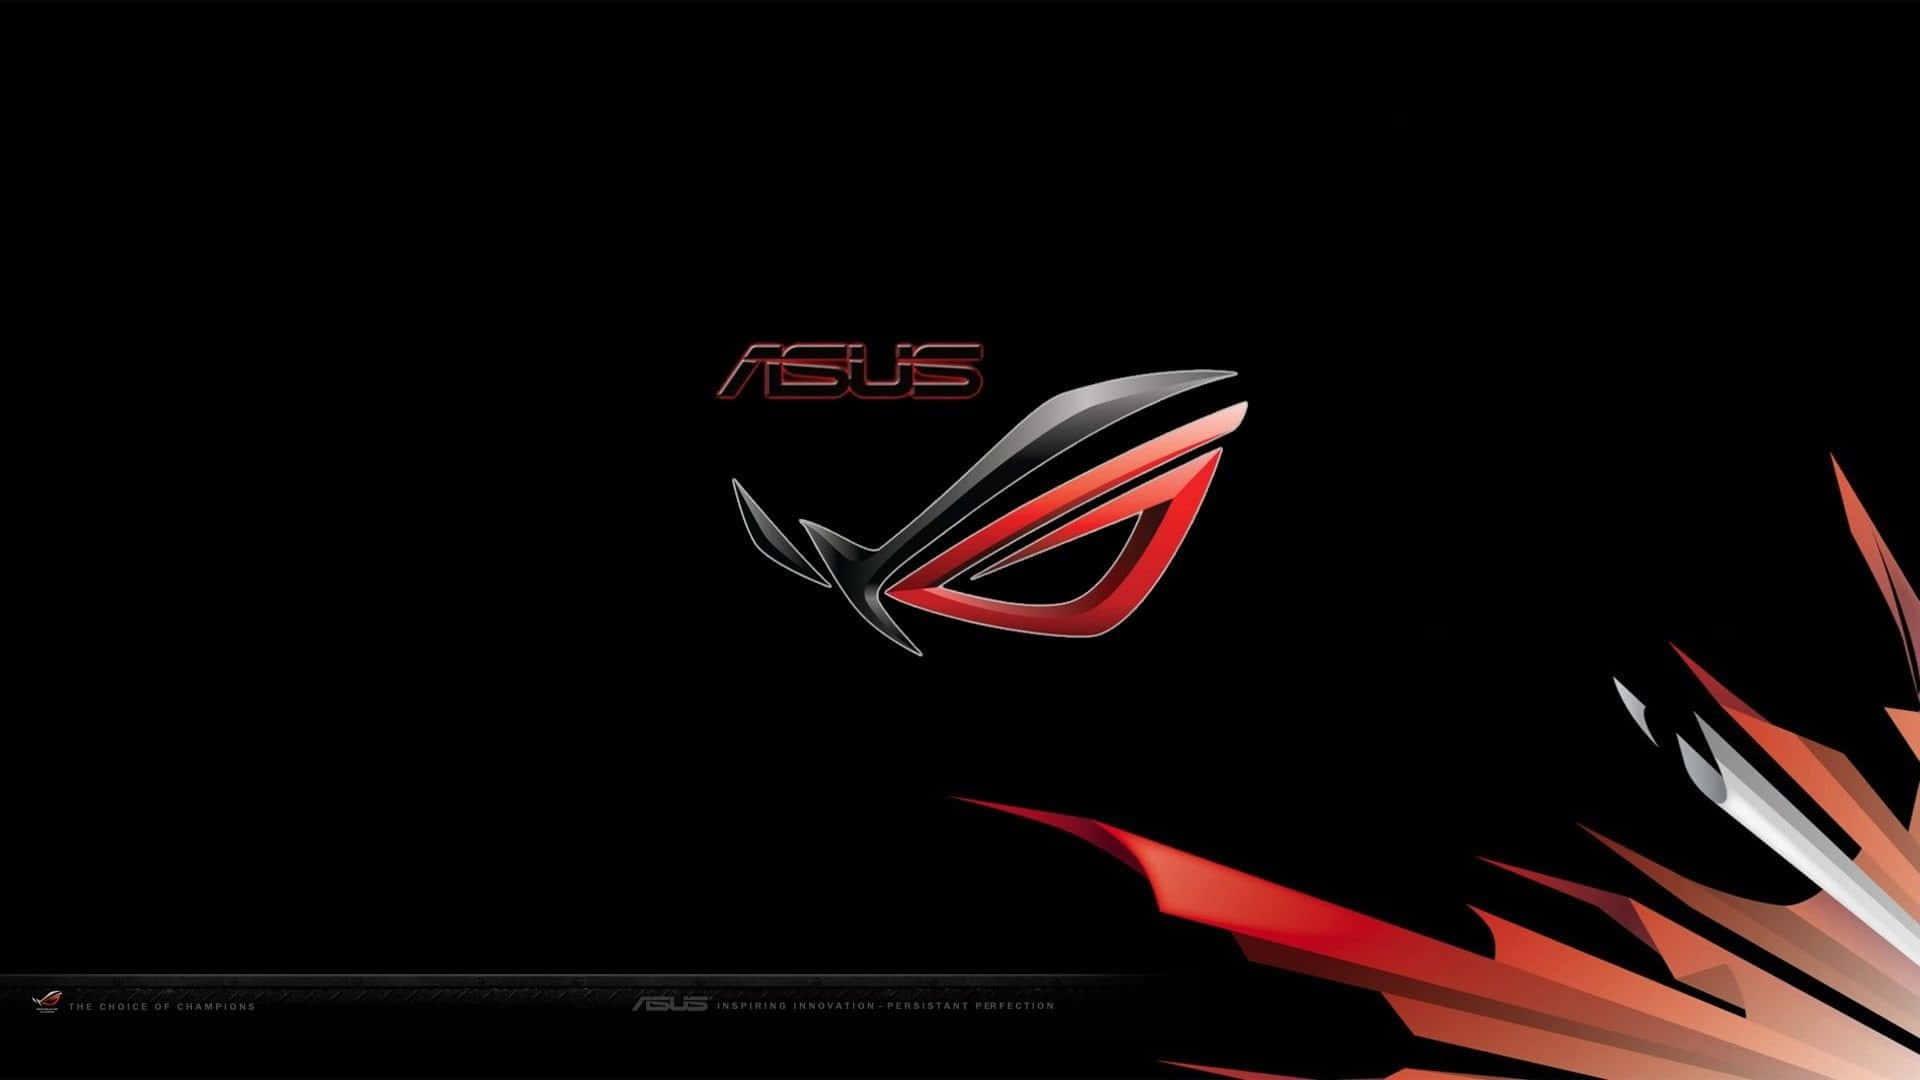 Conquer any task with the Asus ROG